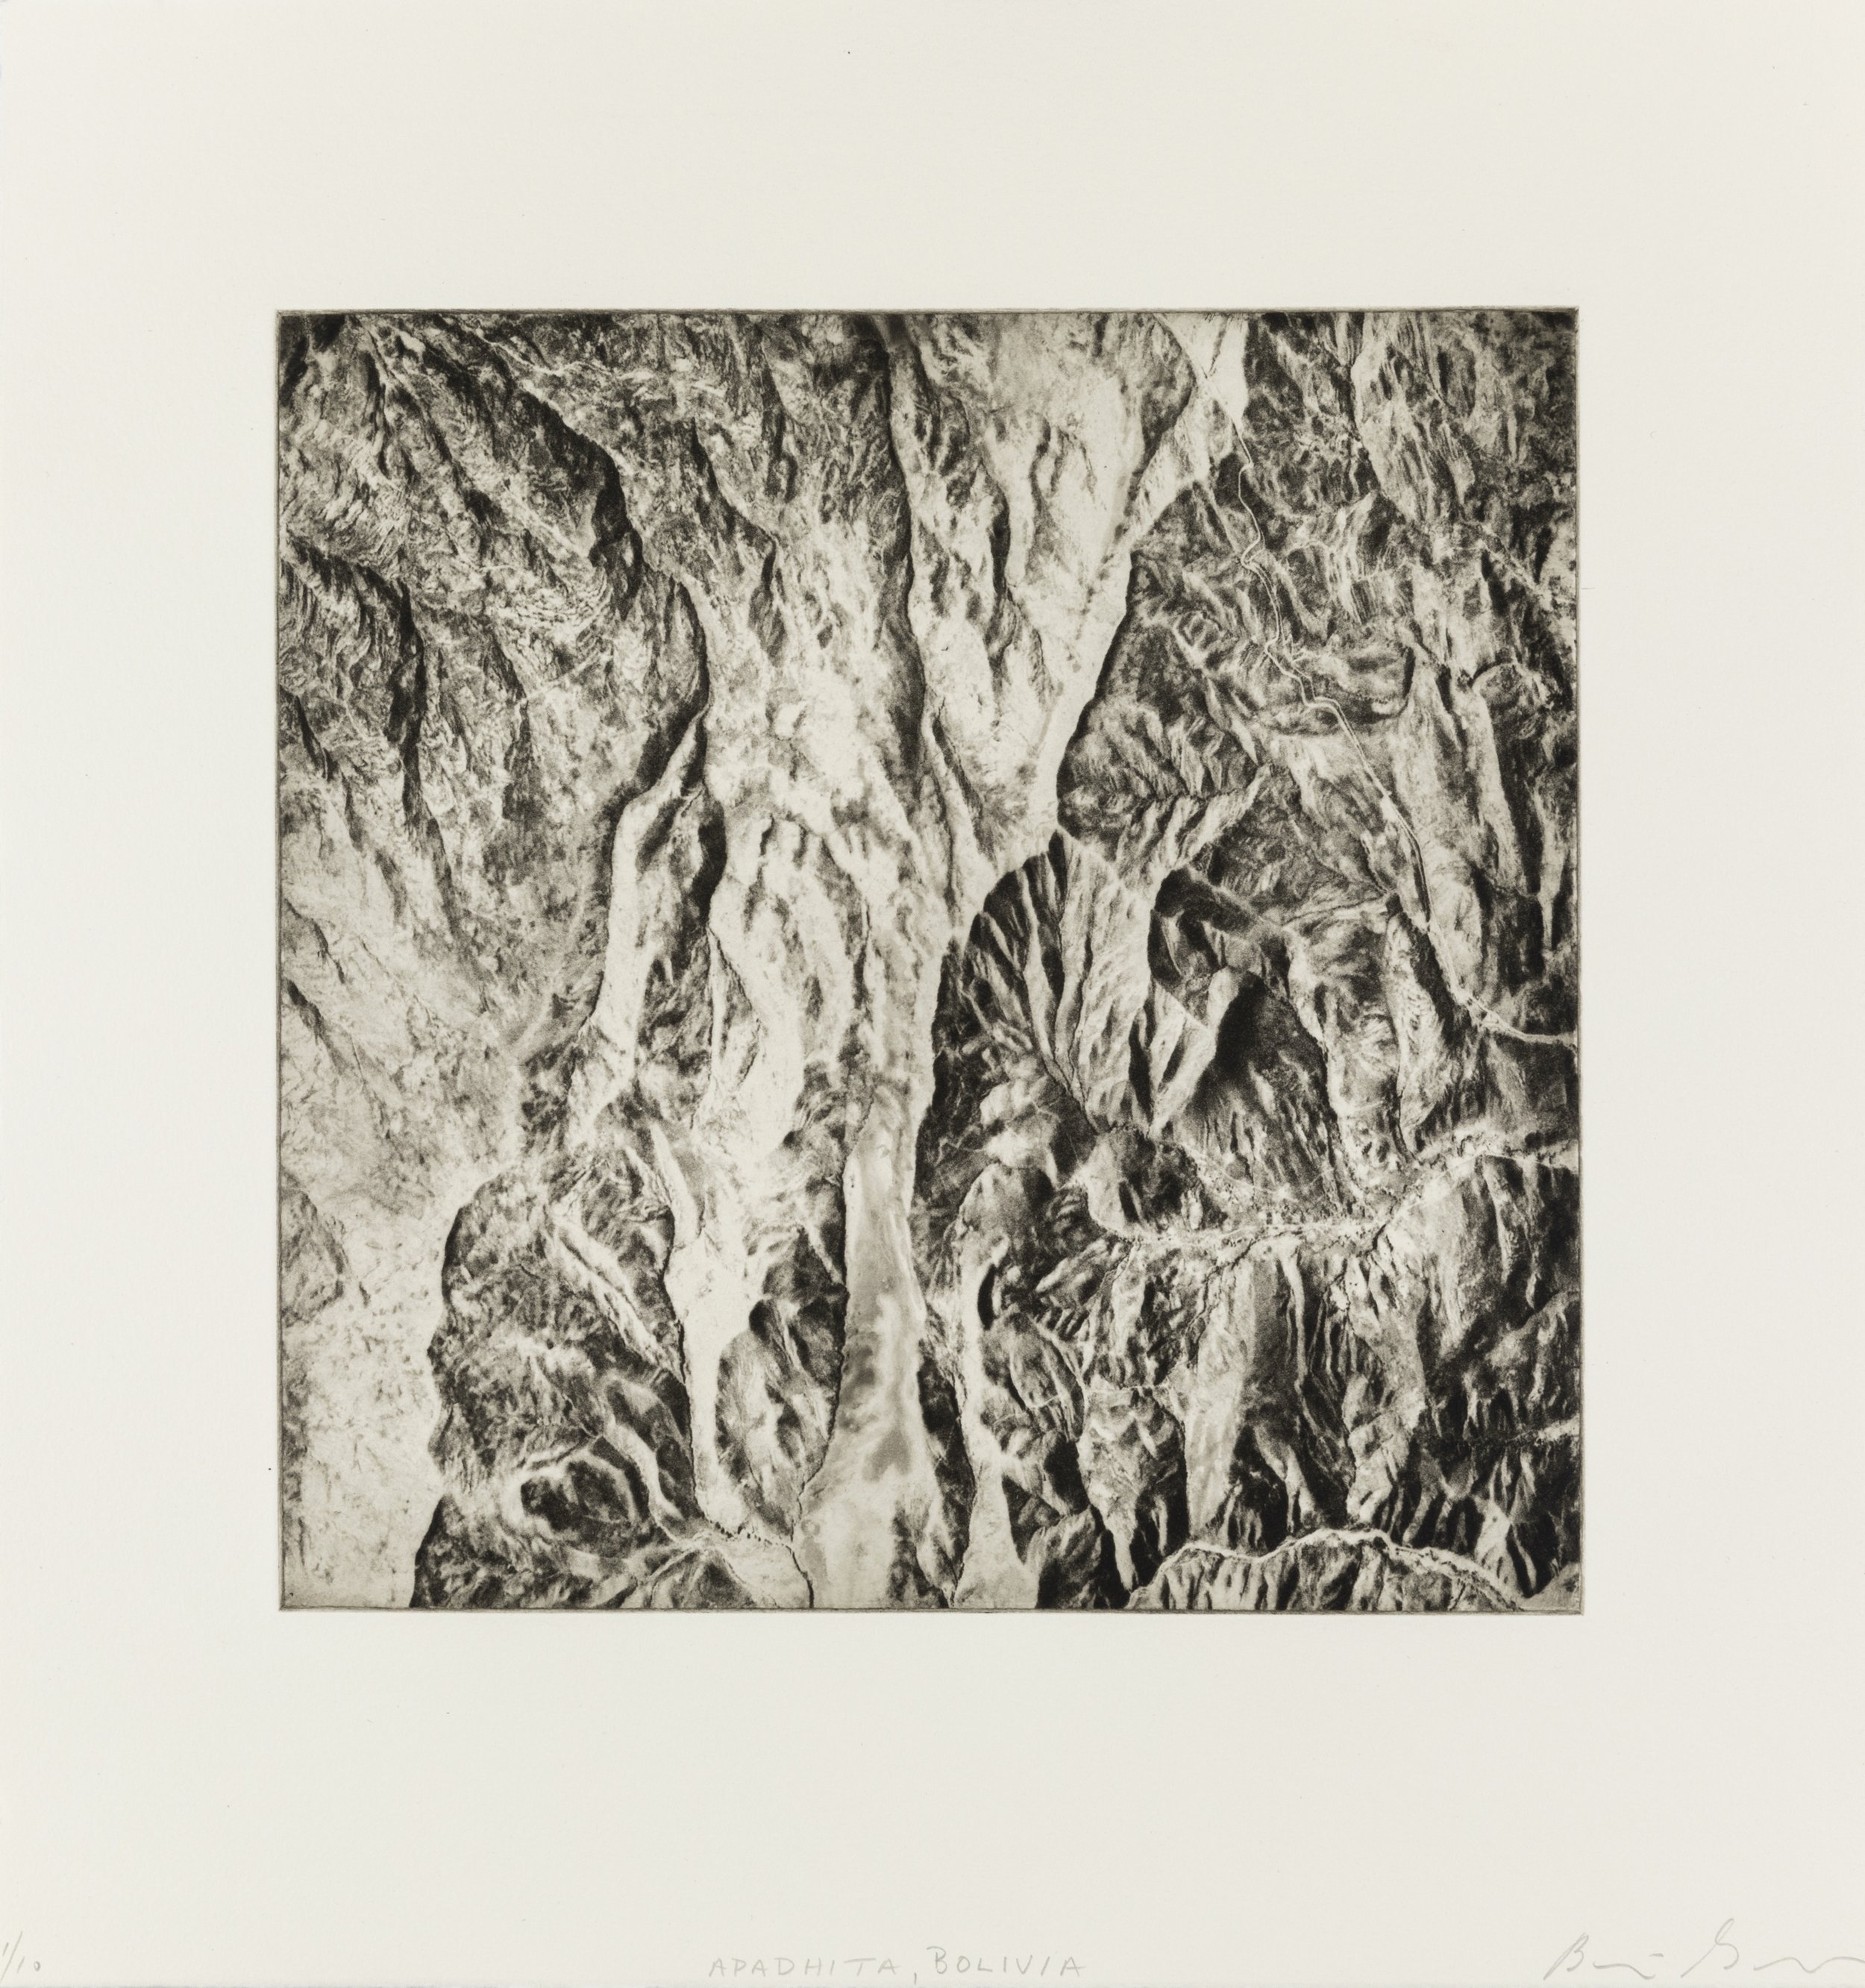    Apachita, Bolivia, 2021    Copperplate photogravure etching on cotton rag paper, plate size; 10.6 x 10.6, paper size; 16 x 15.5, edition 10  